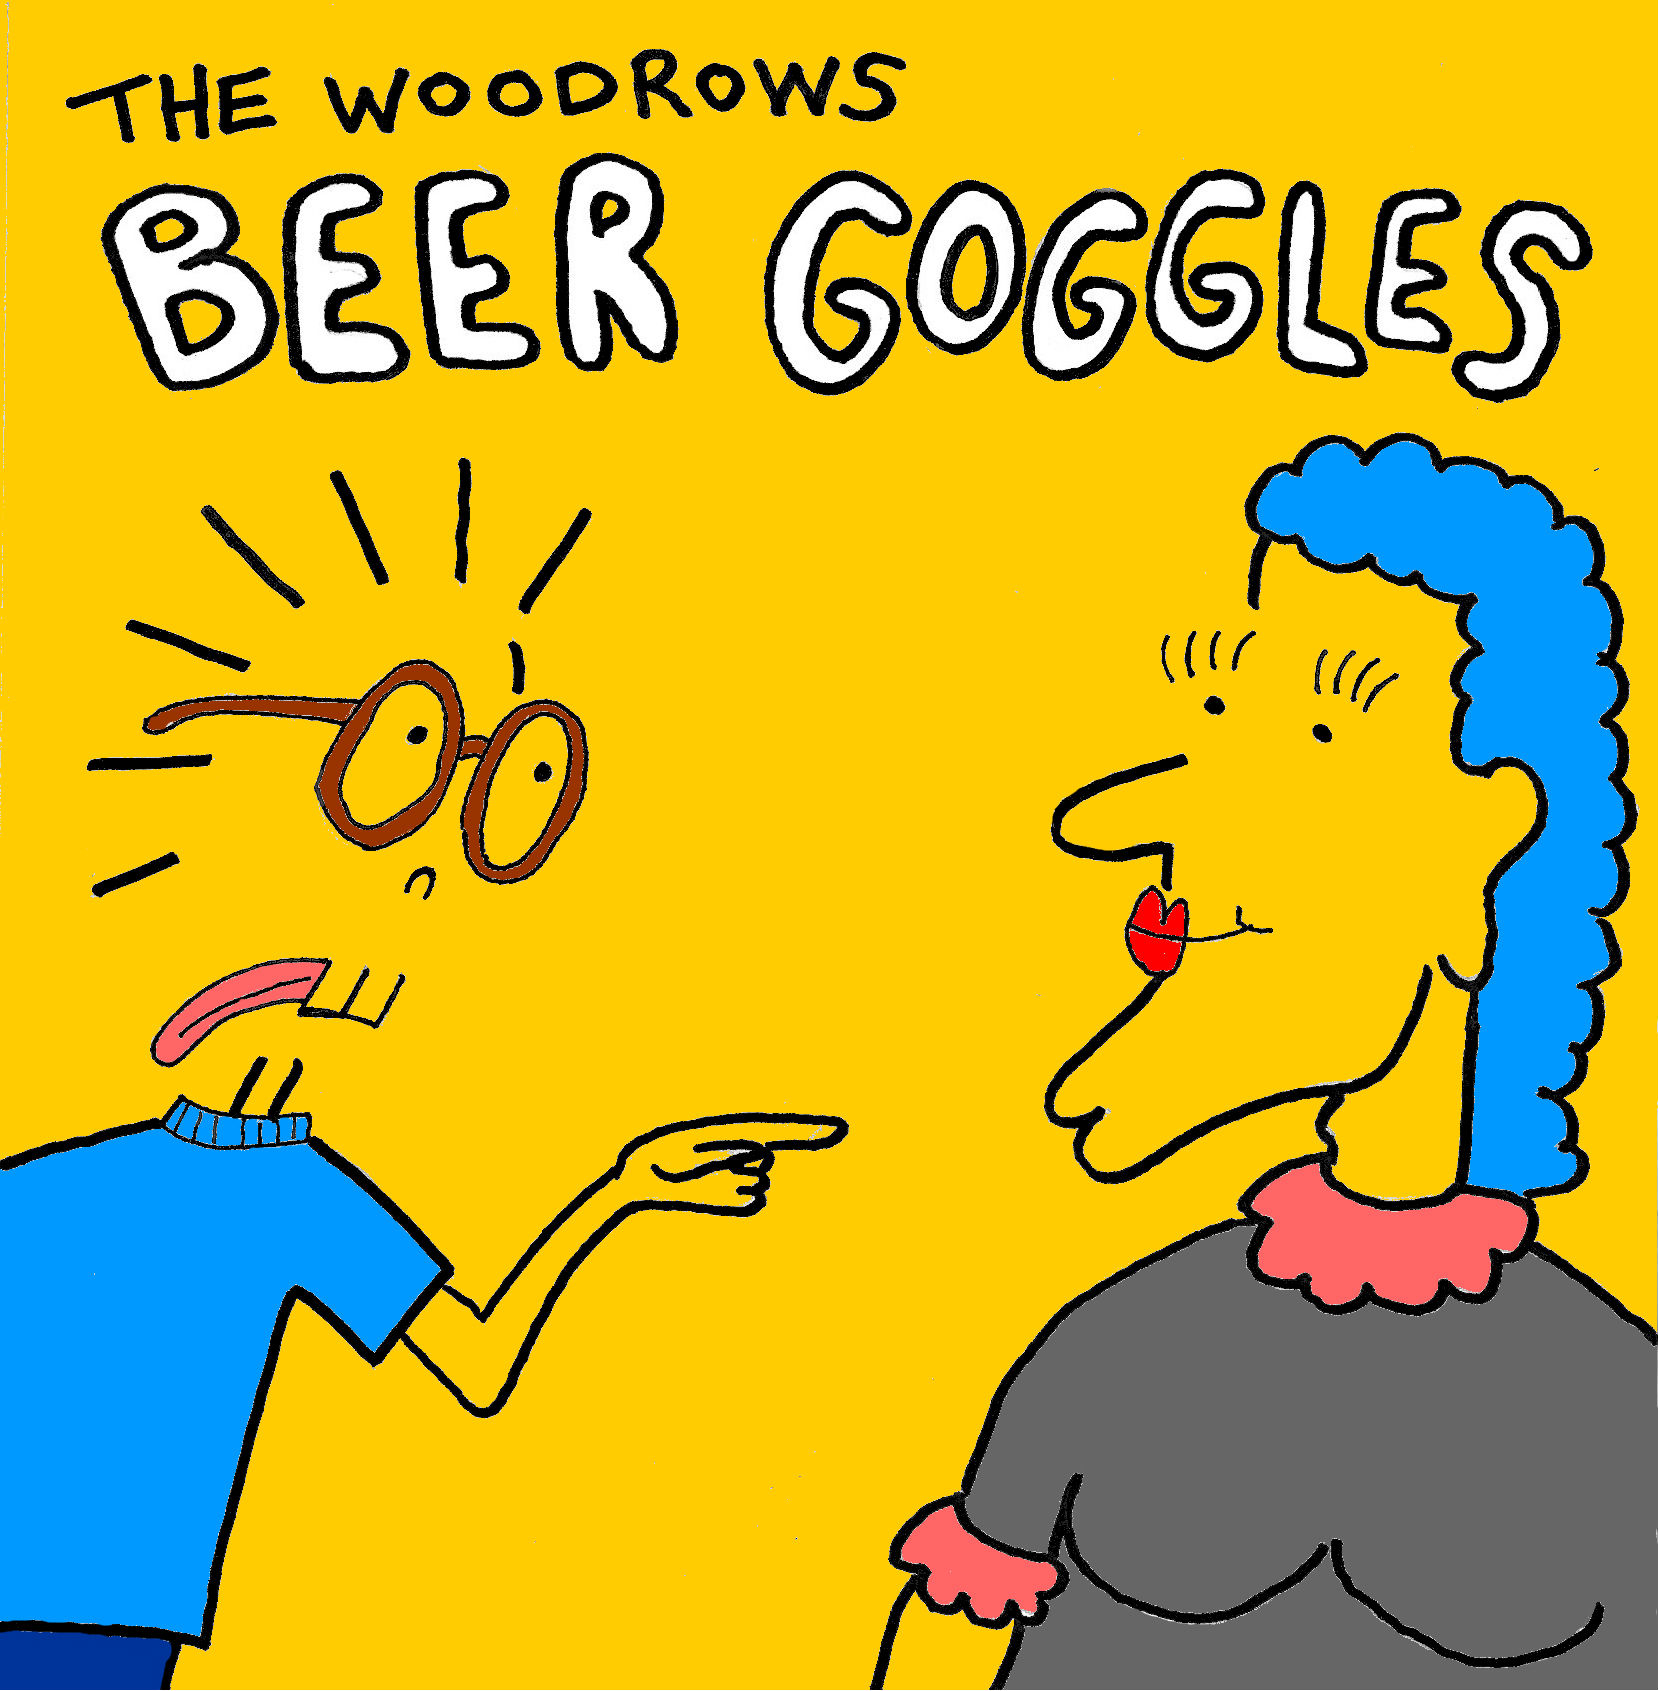 The Woodrows Beer Goggles